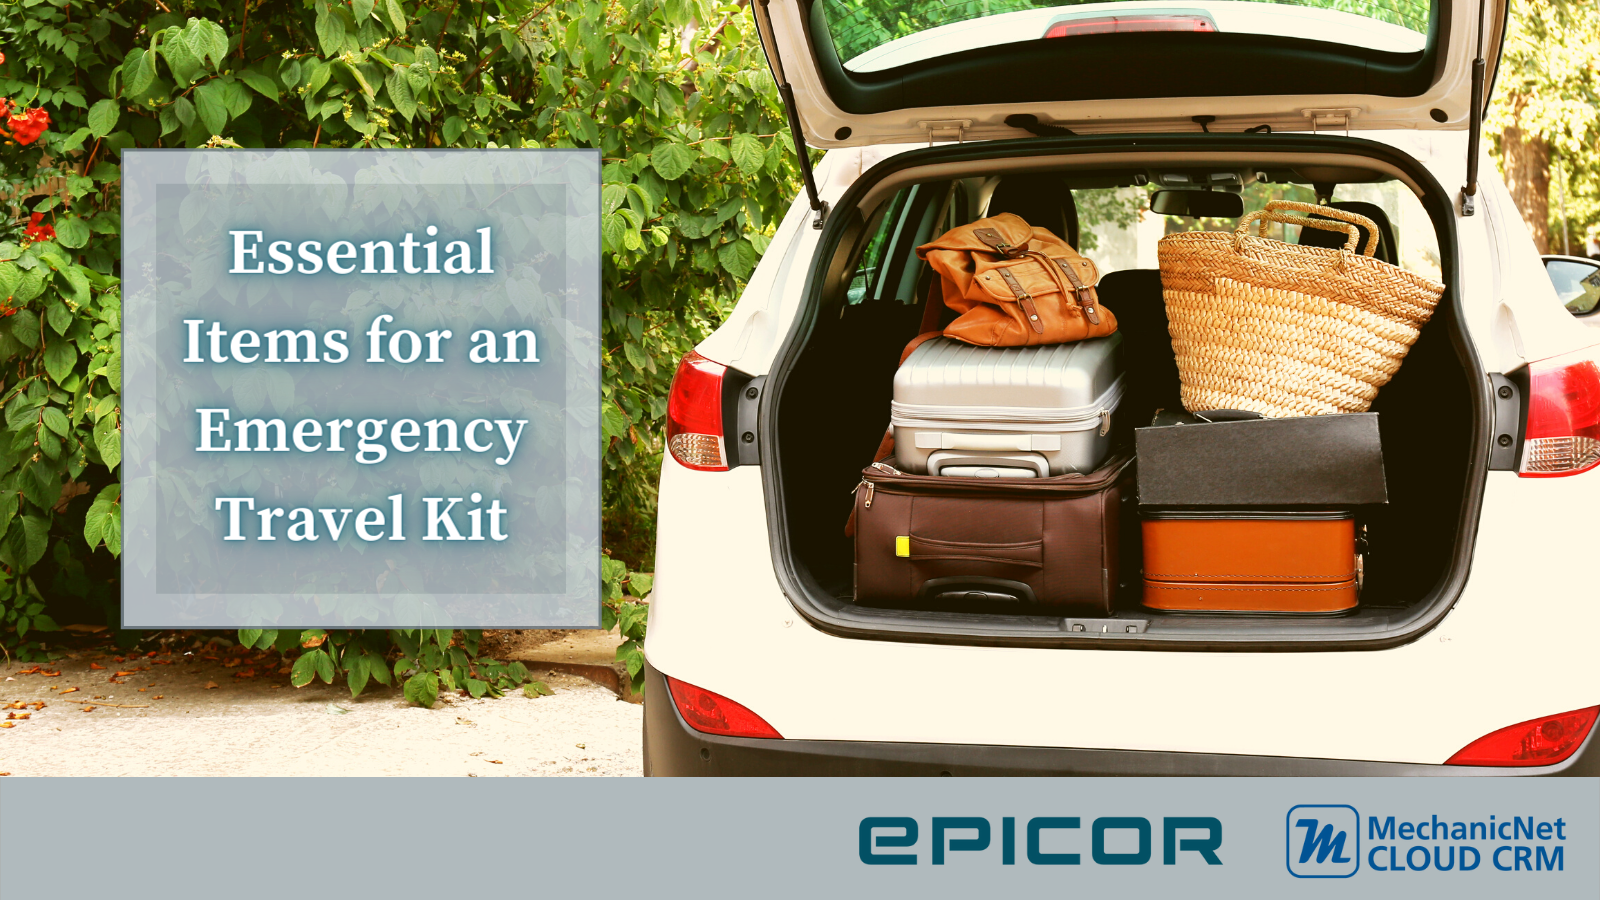 essential items for an emergency kit: full trunk travel image